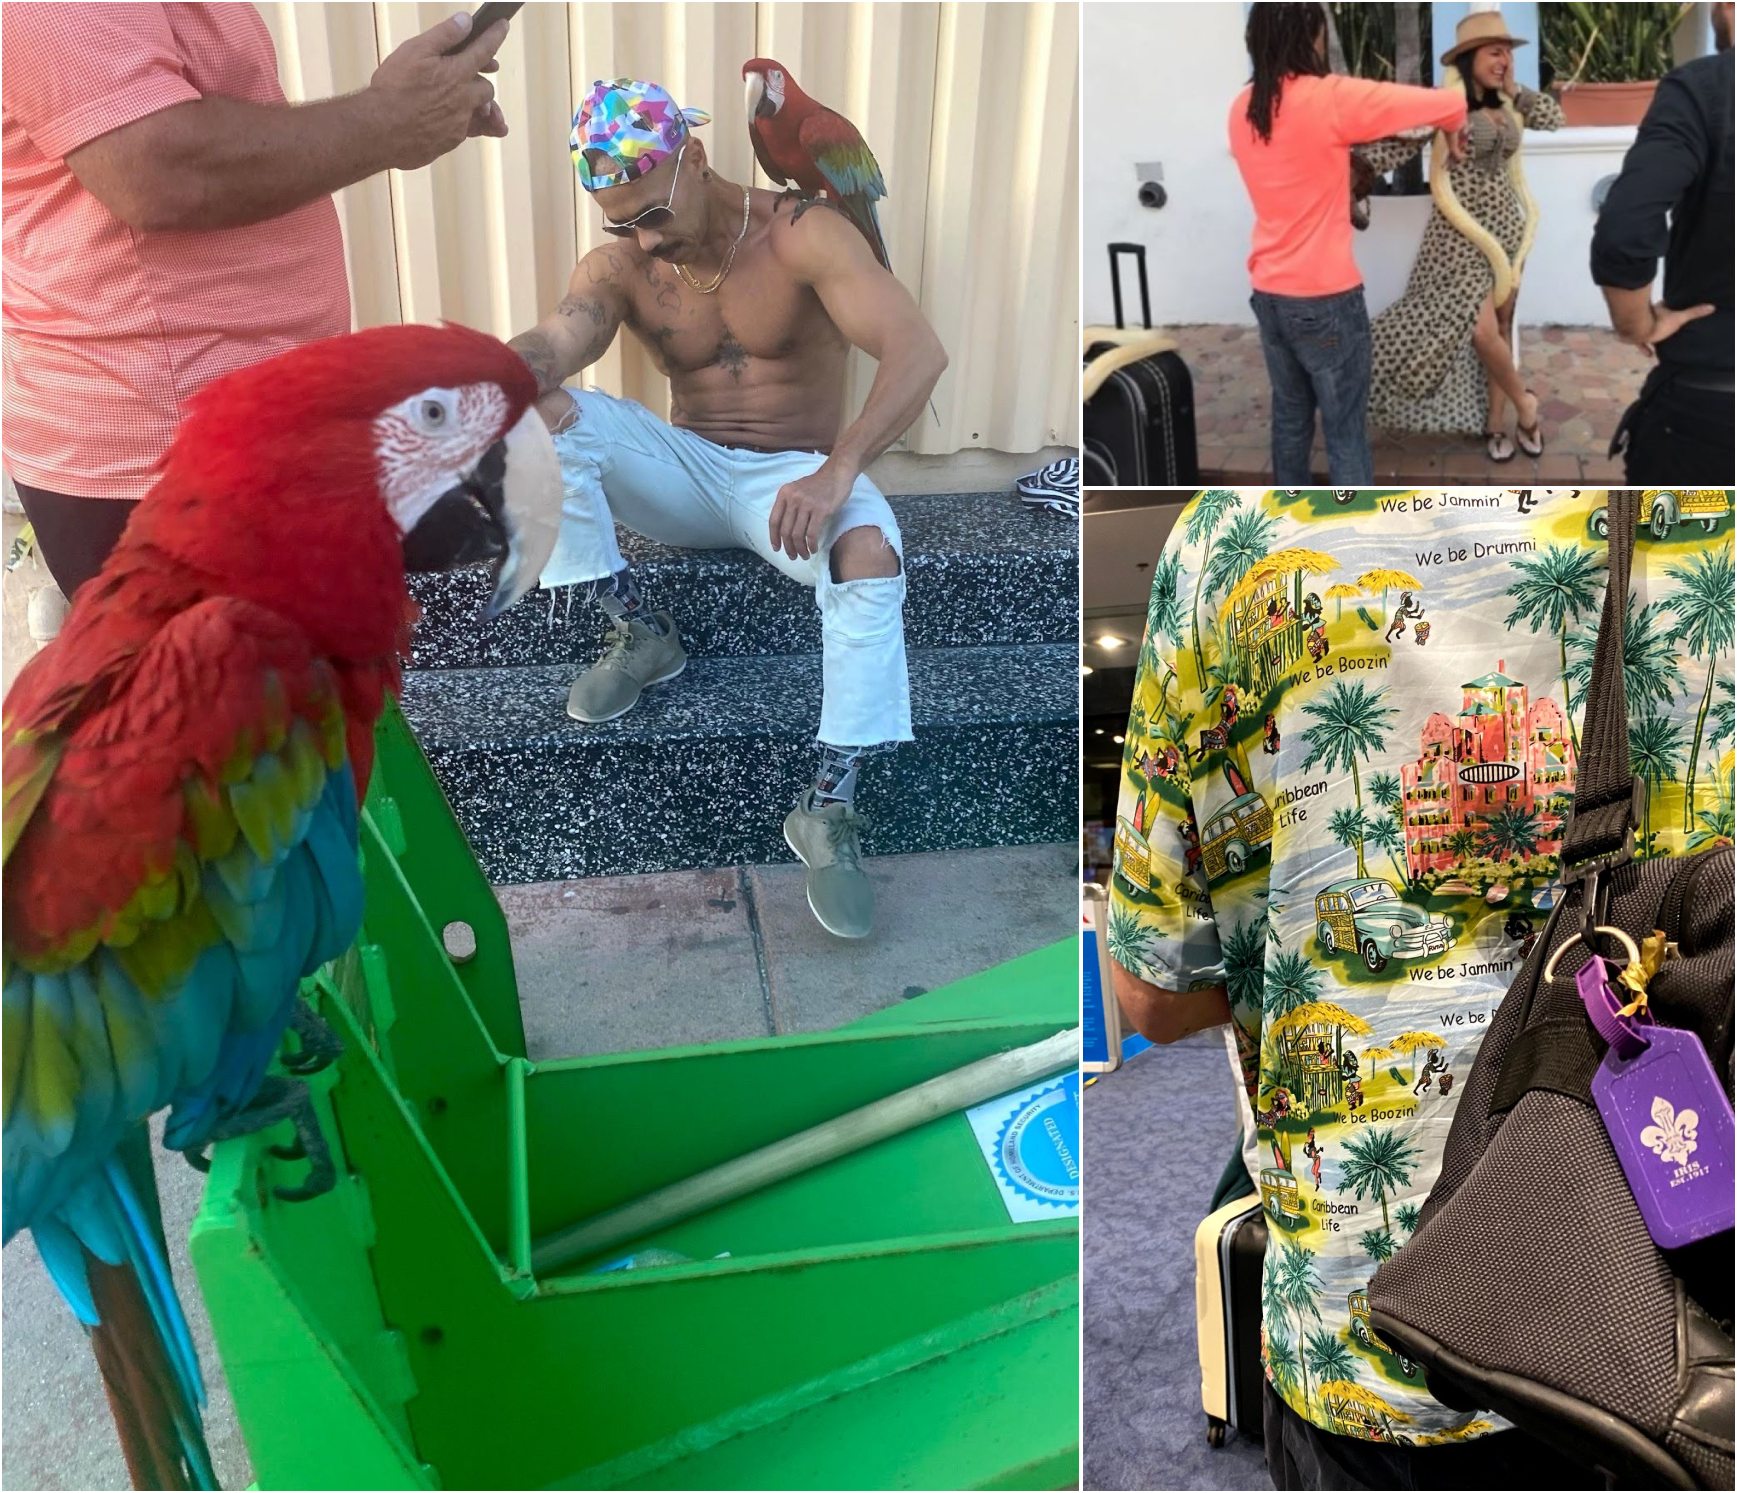 Left & top: Small businessmen have set up shop on the streets of Miami Beach, selling access to their pet parrots and snakes so that tourists can take pictures with them.  Bottom: Read his shirt closely. Photo taken at Miami Airport.